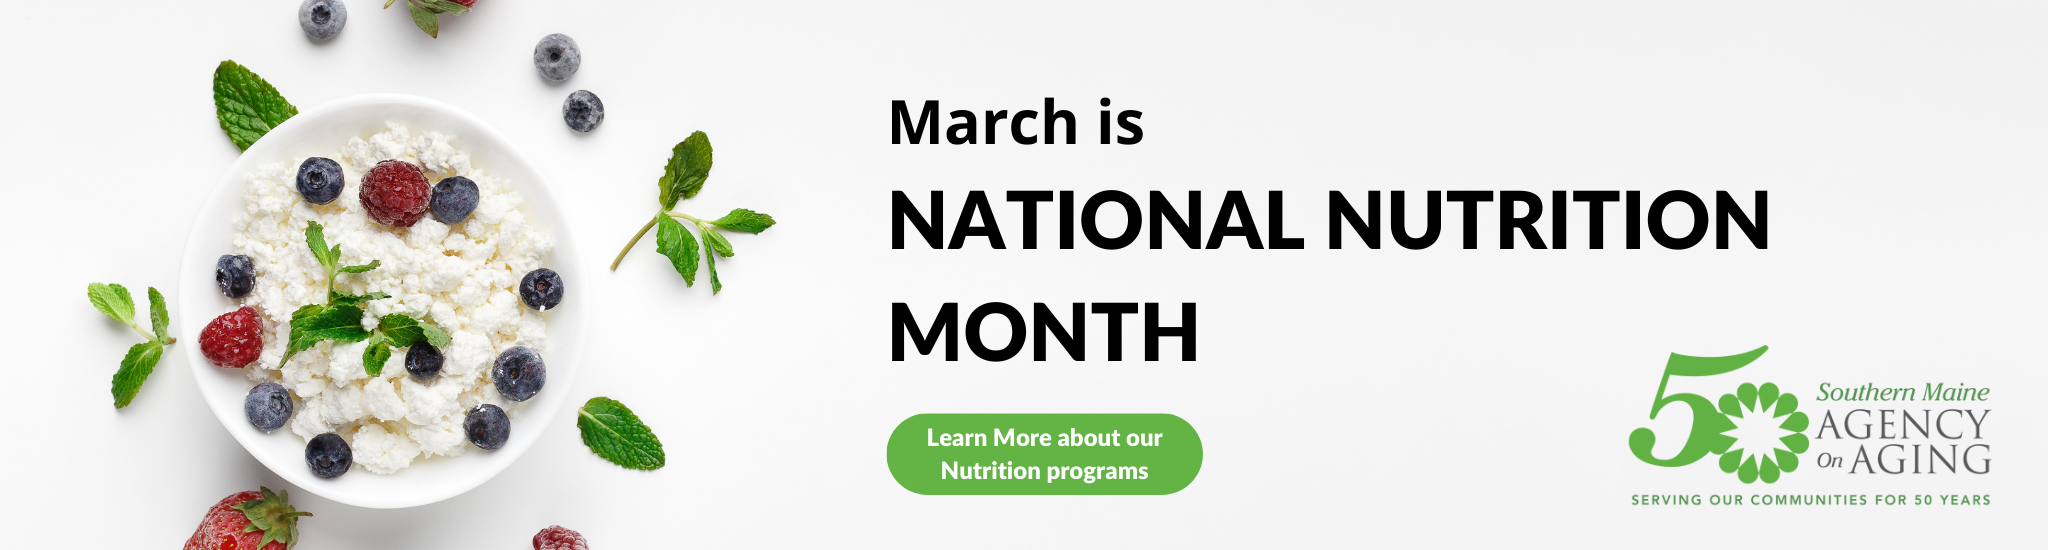 March is National Nutrition Month. Learn more about our Nutrition programs when you visit our web page https://www.smaaa.org/wellness/index.html 